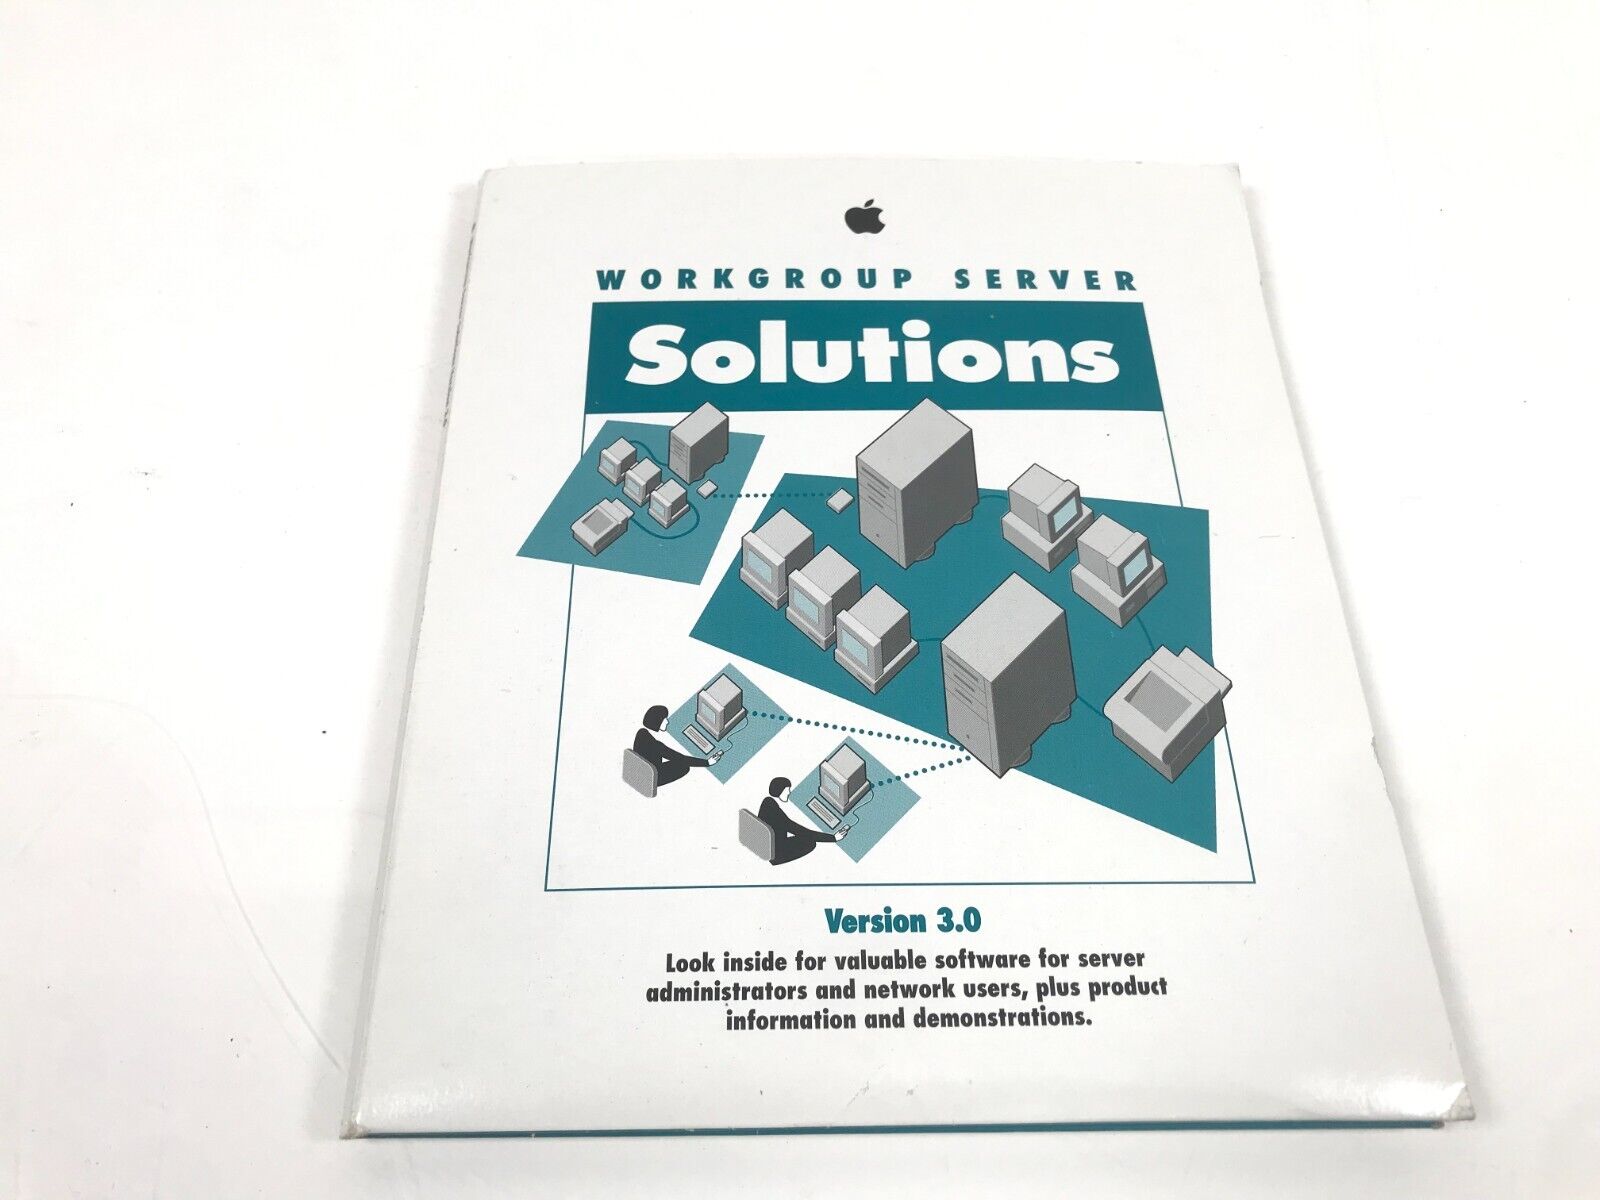 Apple Workgroup Server Solutions Version 3.0 (Rare)